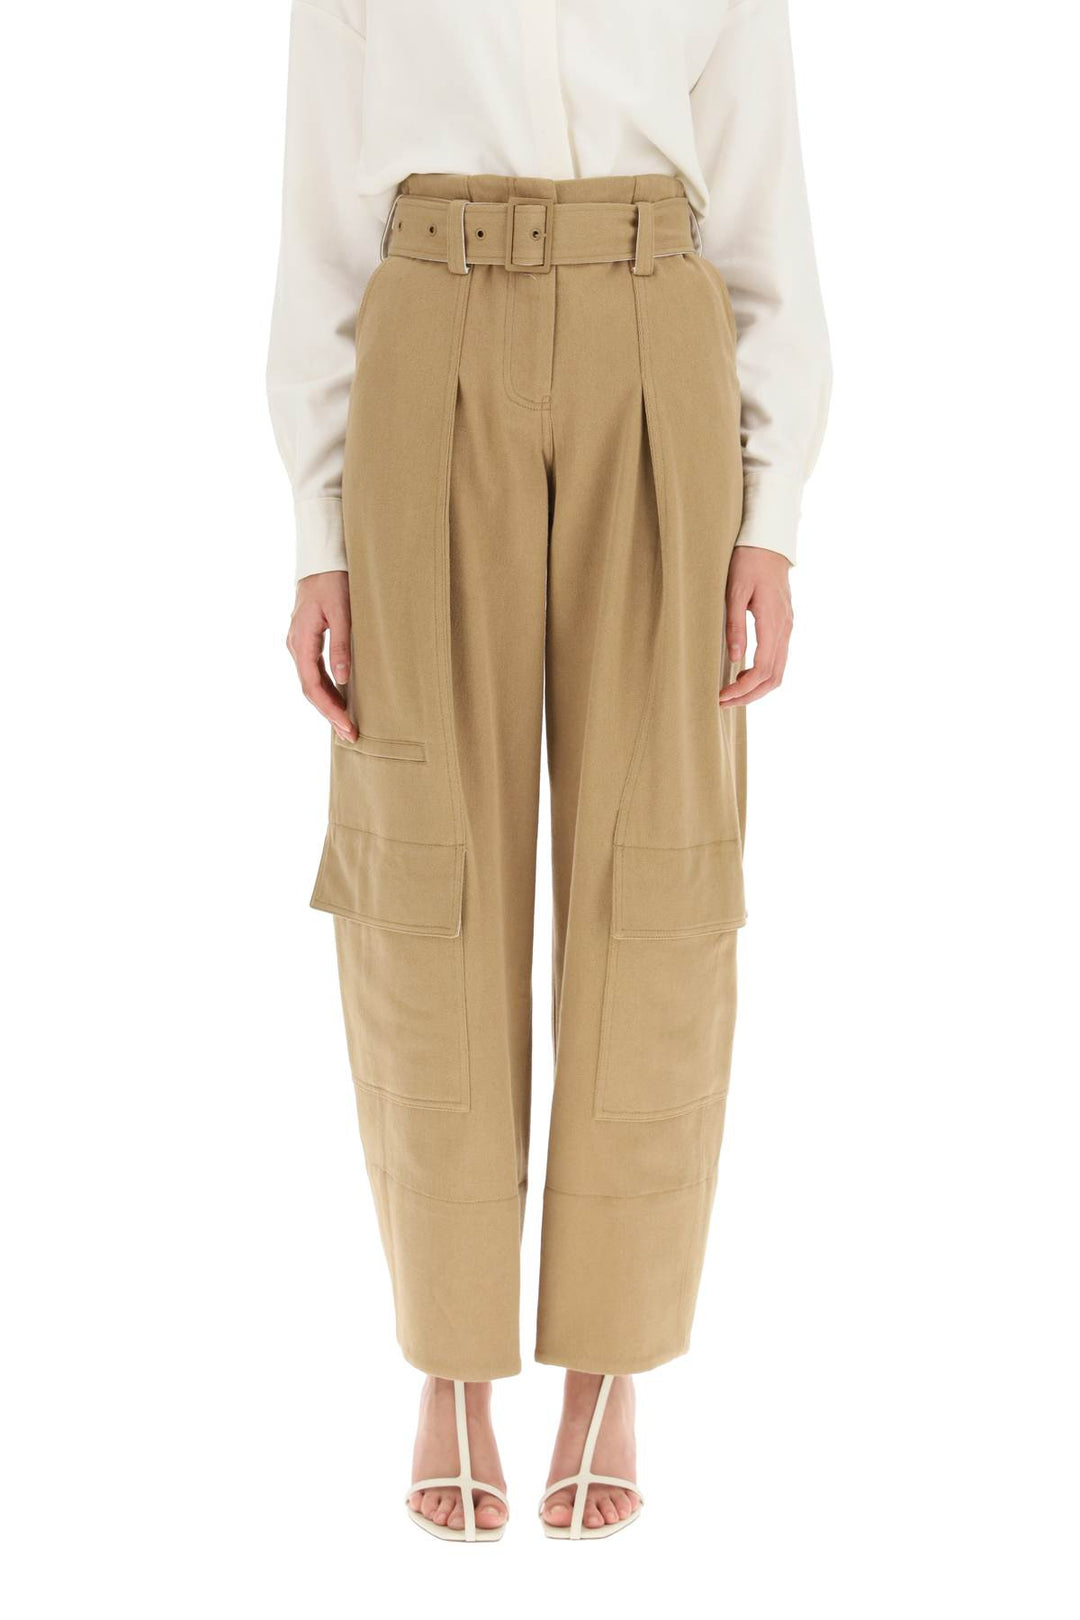 Low Classic Cargo Pants With Matching Belt   Beige